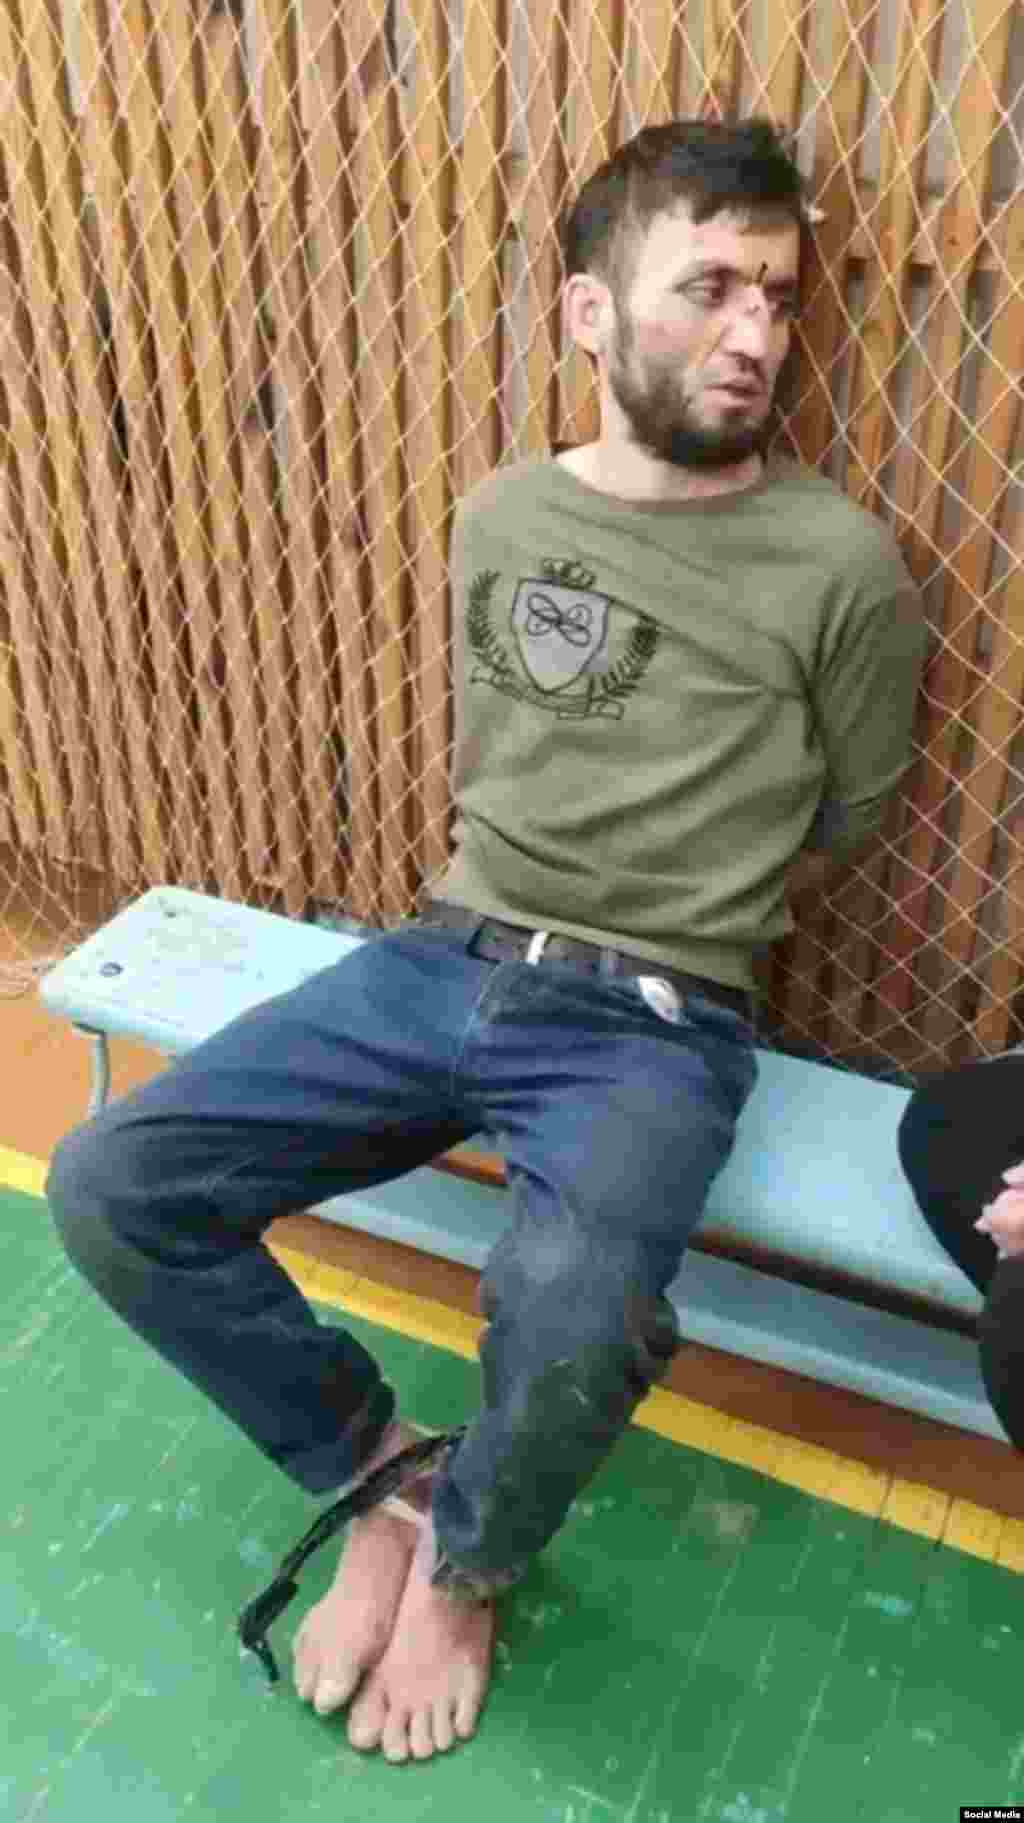 Dalerjon Mirzoev is seen immediately after his capture in the Bryansk region on March 23. He was captured on suspicion of being one of four Tajik nationals involved in the terrorist attack on a concert hall near Moscow on March 22 that left at least 137 dead and more than 180 injured.